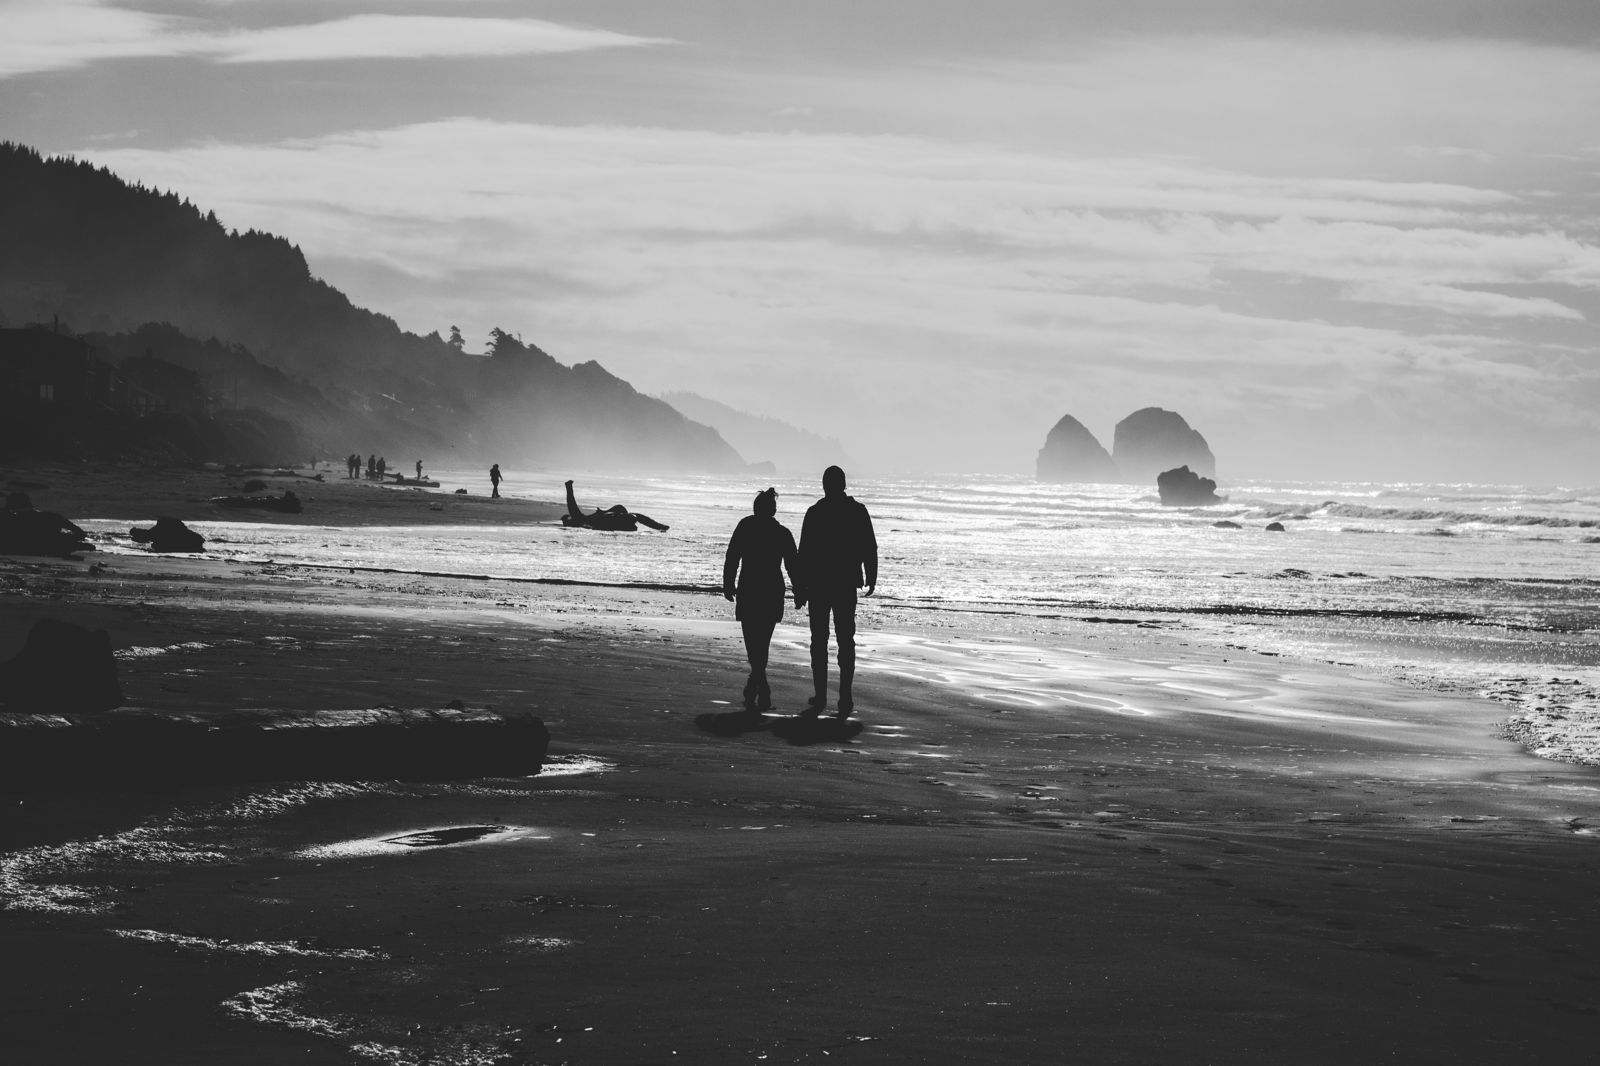 Sea Ocean Beach Black And White People Sand Walking Couple Wallpaper.com. Best High Quality Wallpaper